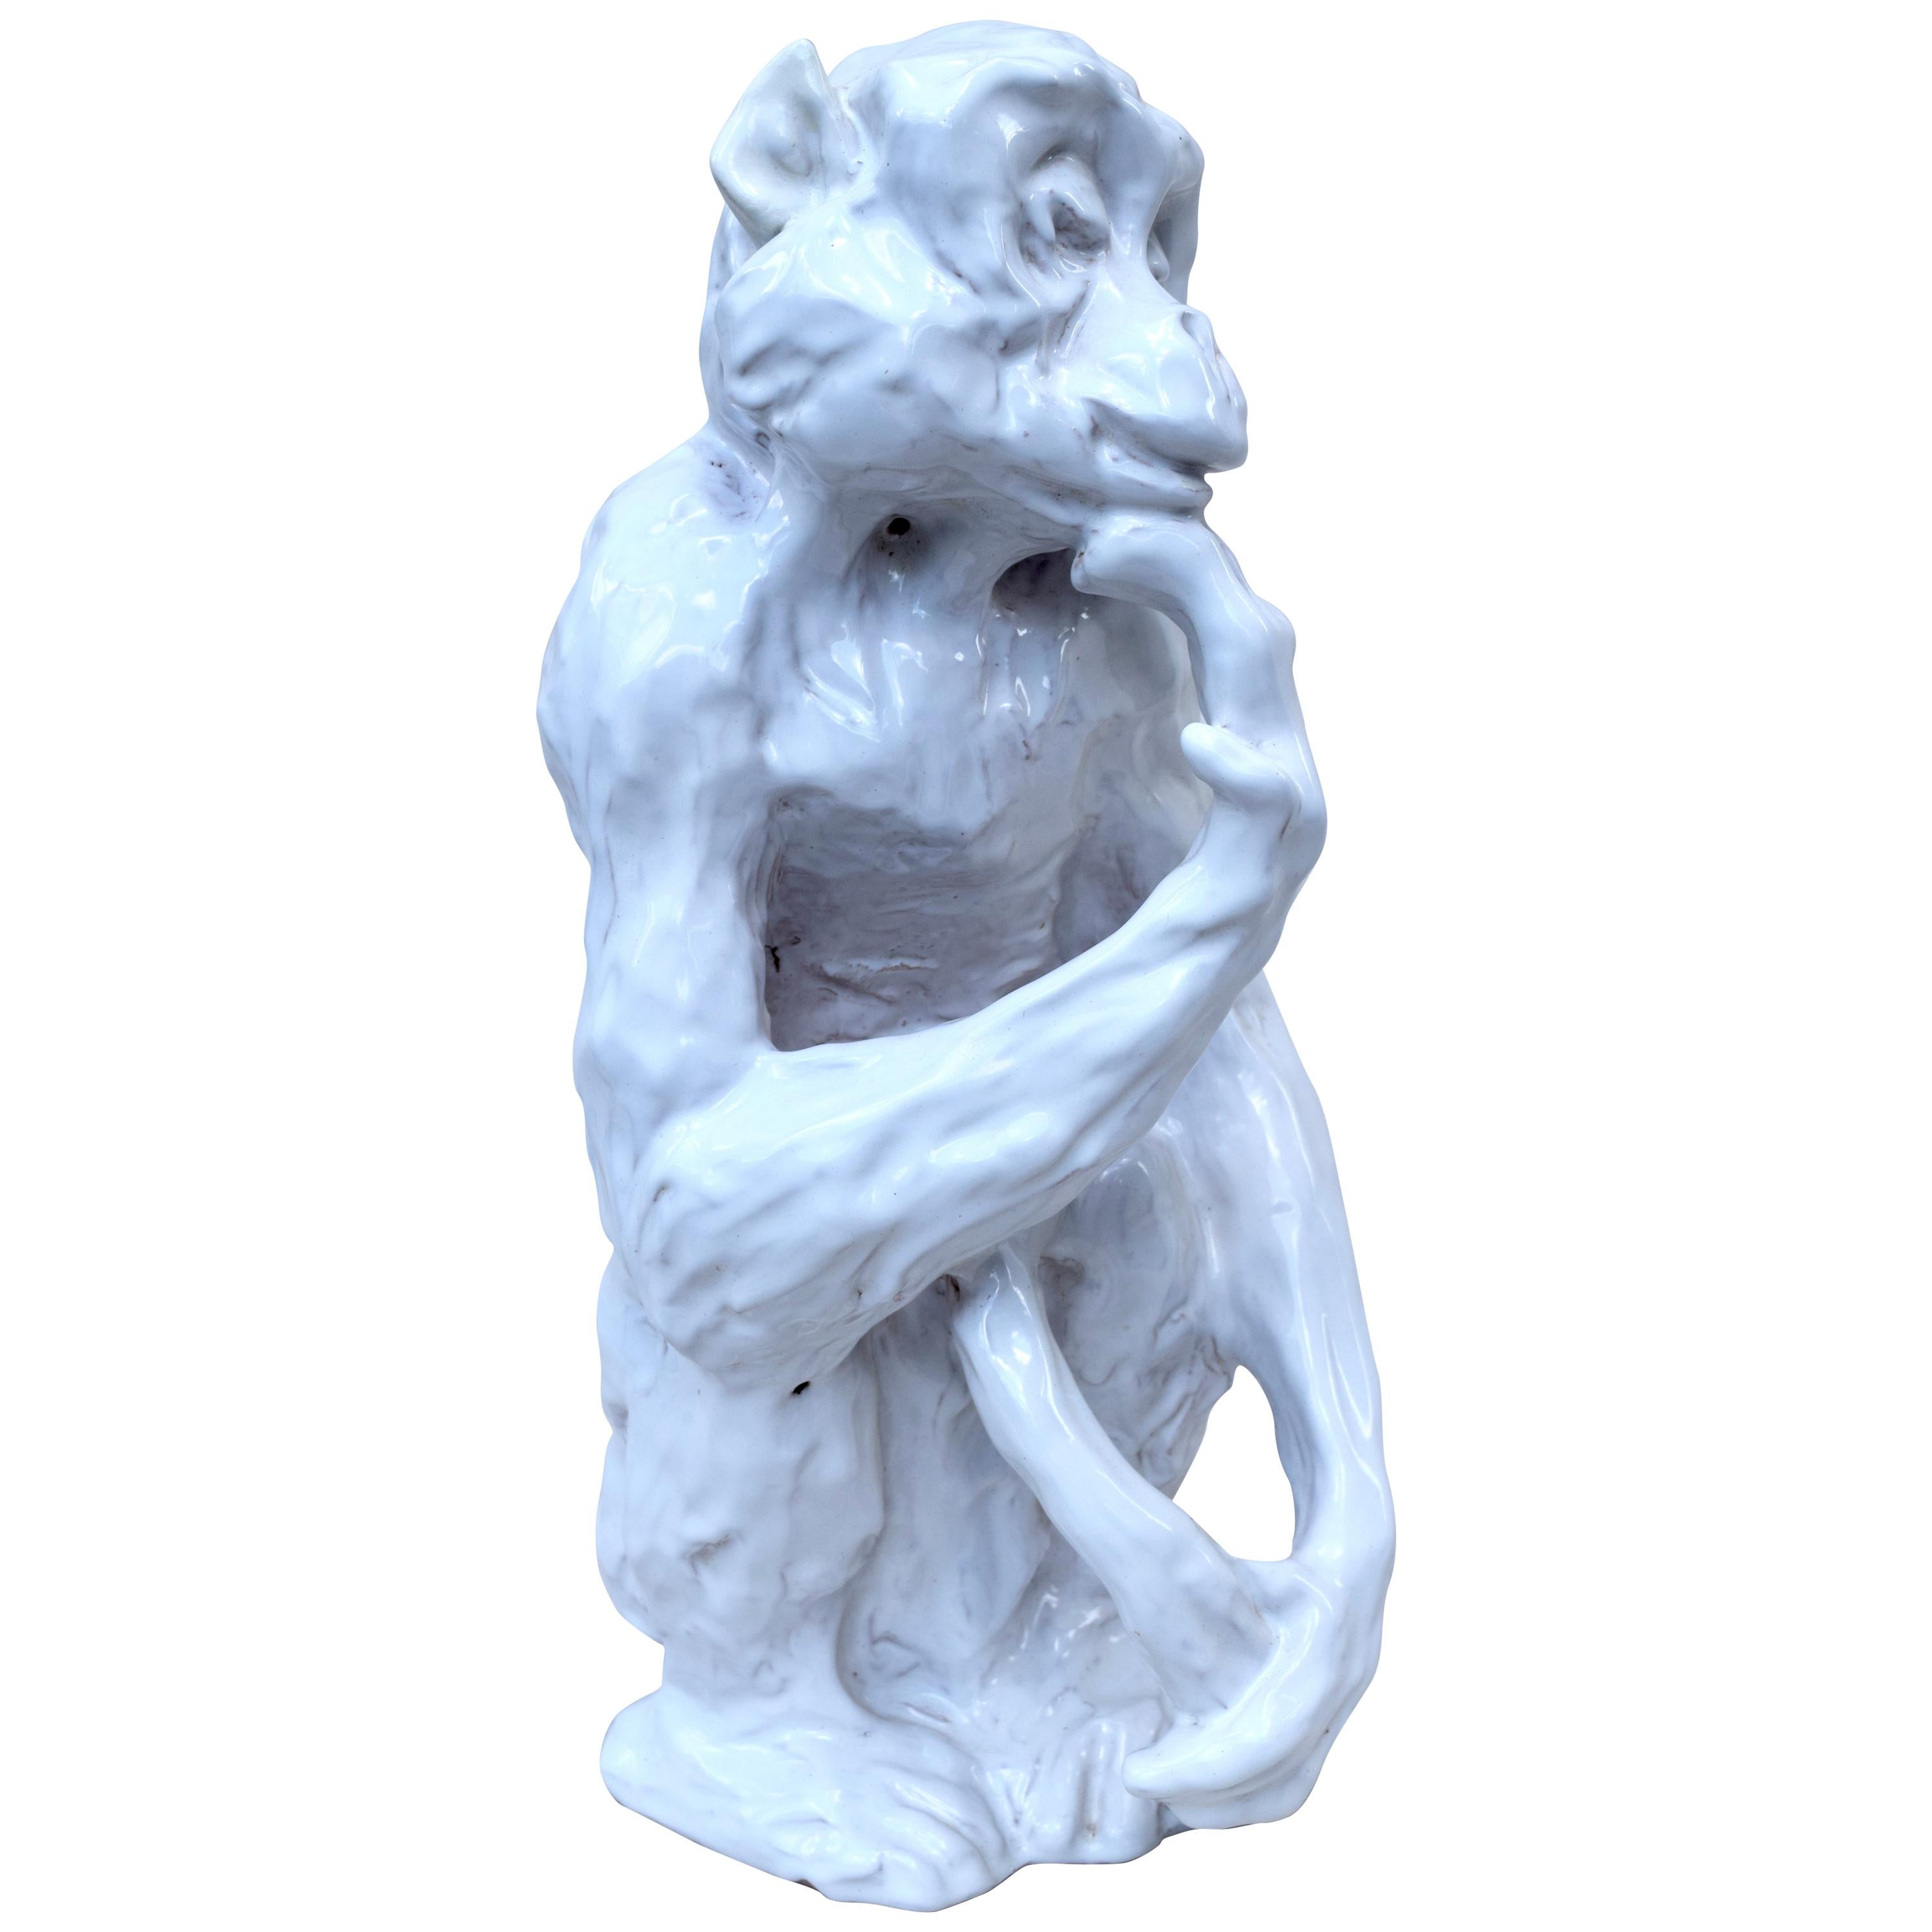 A delightful hand-sculpted and glazed Hollywood Regency style sitting Monkey in a contemplative pose. Mid-Century Modern period, made in Italy and signed.